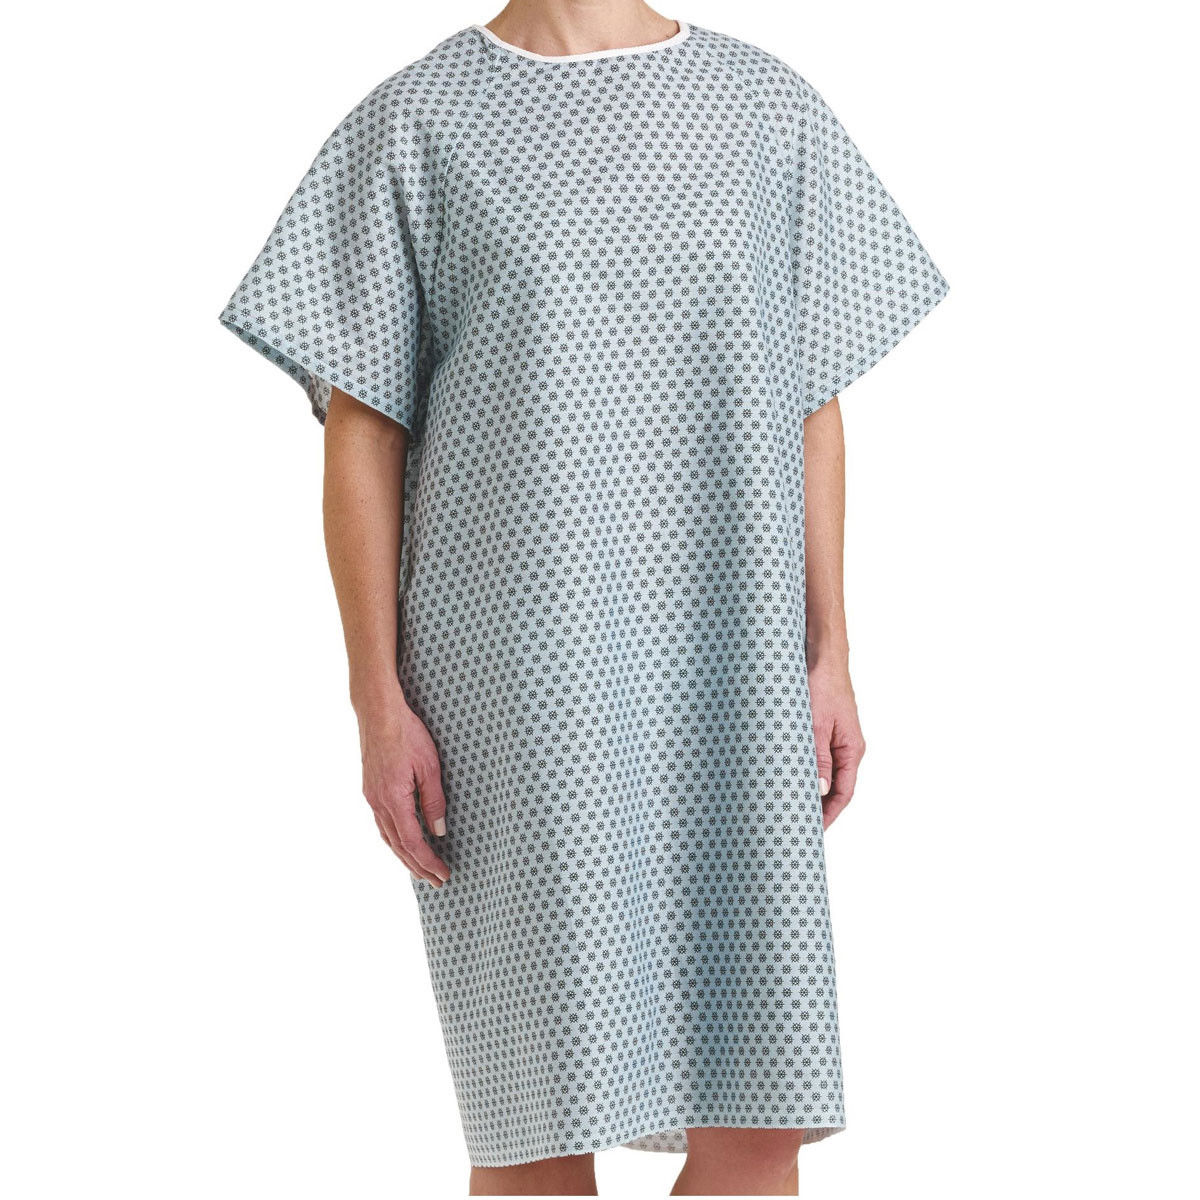 Is this hospital gown crafted from lightweight fabric?